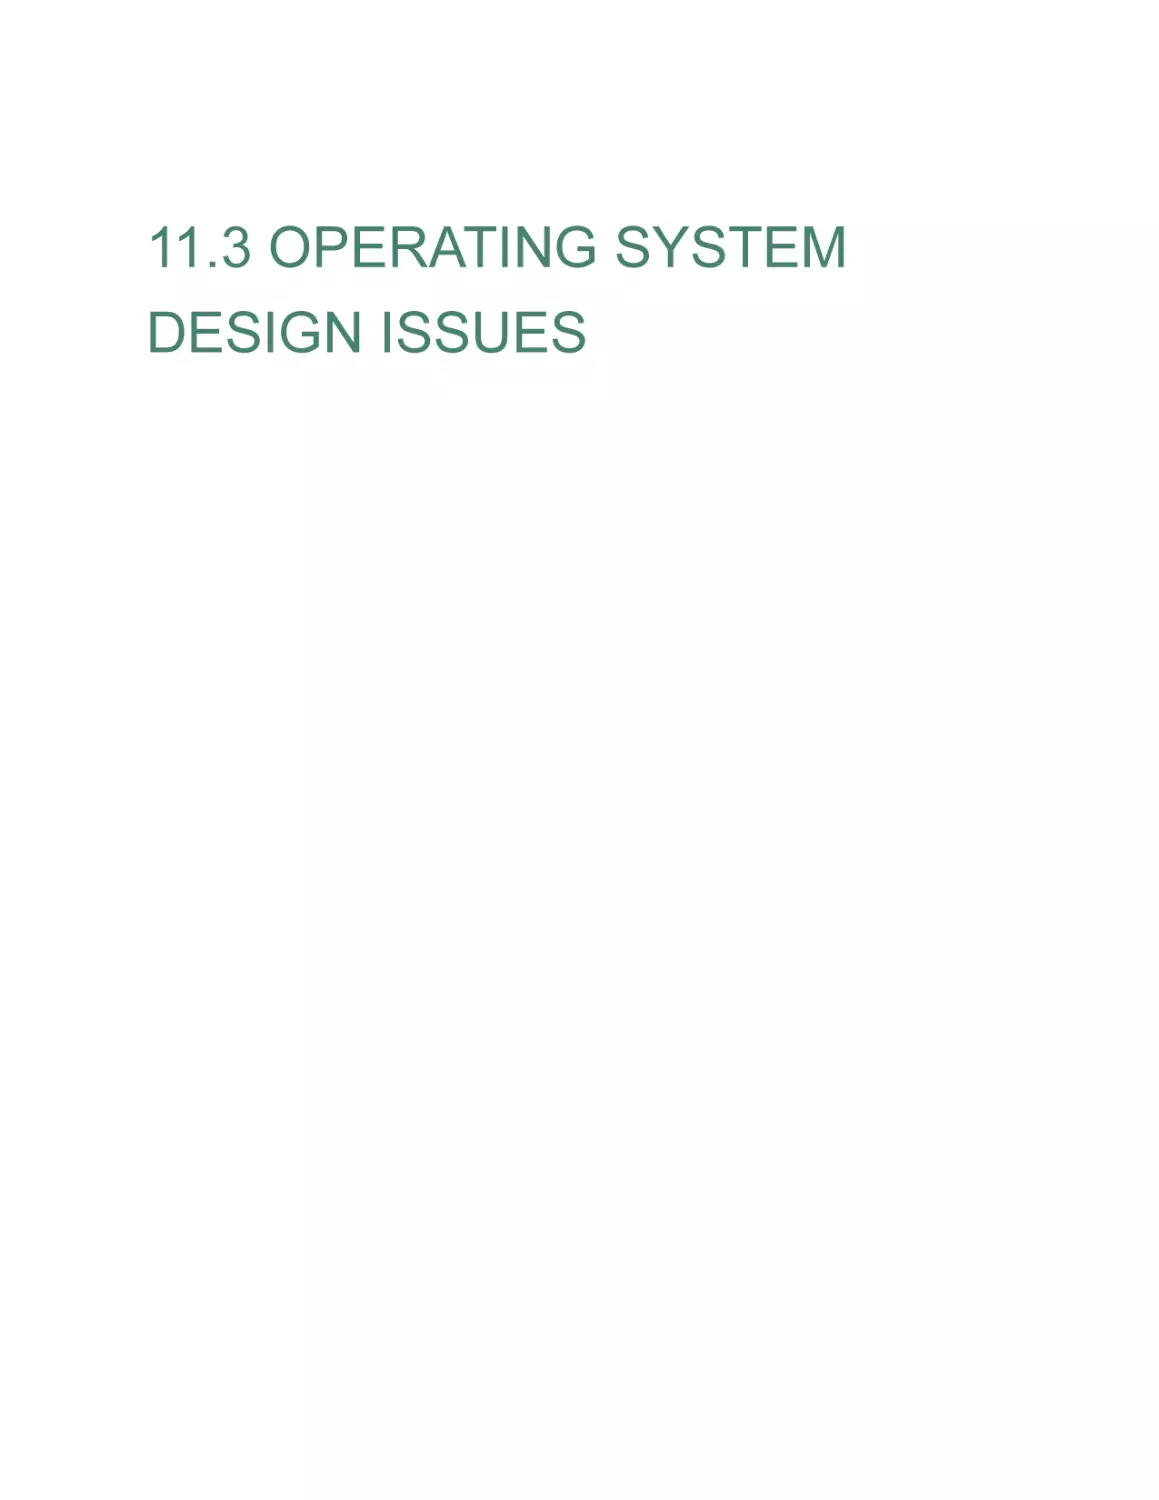 11.3 OPERATING SYSTEM DESIGN ISSUES